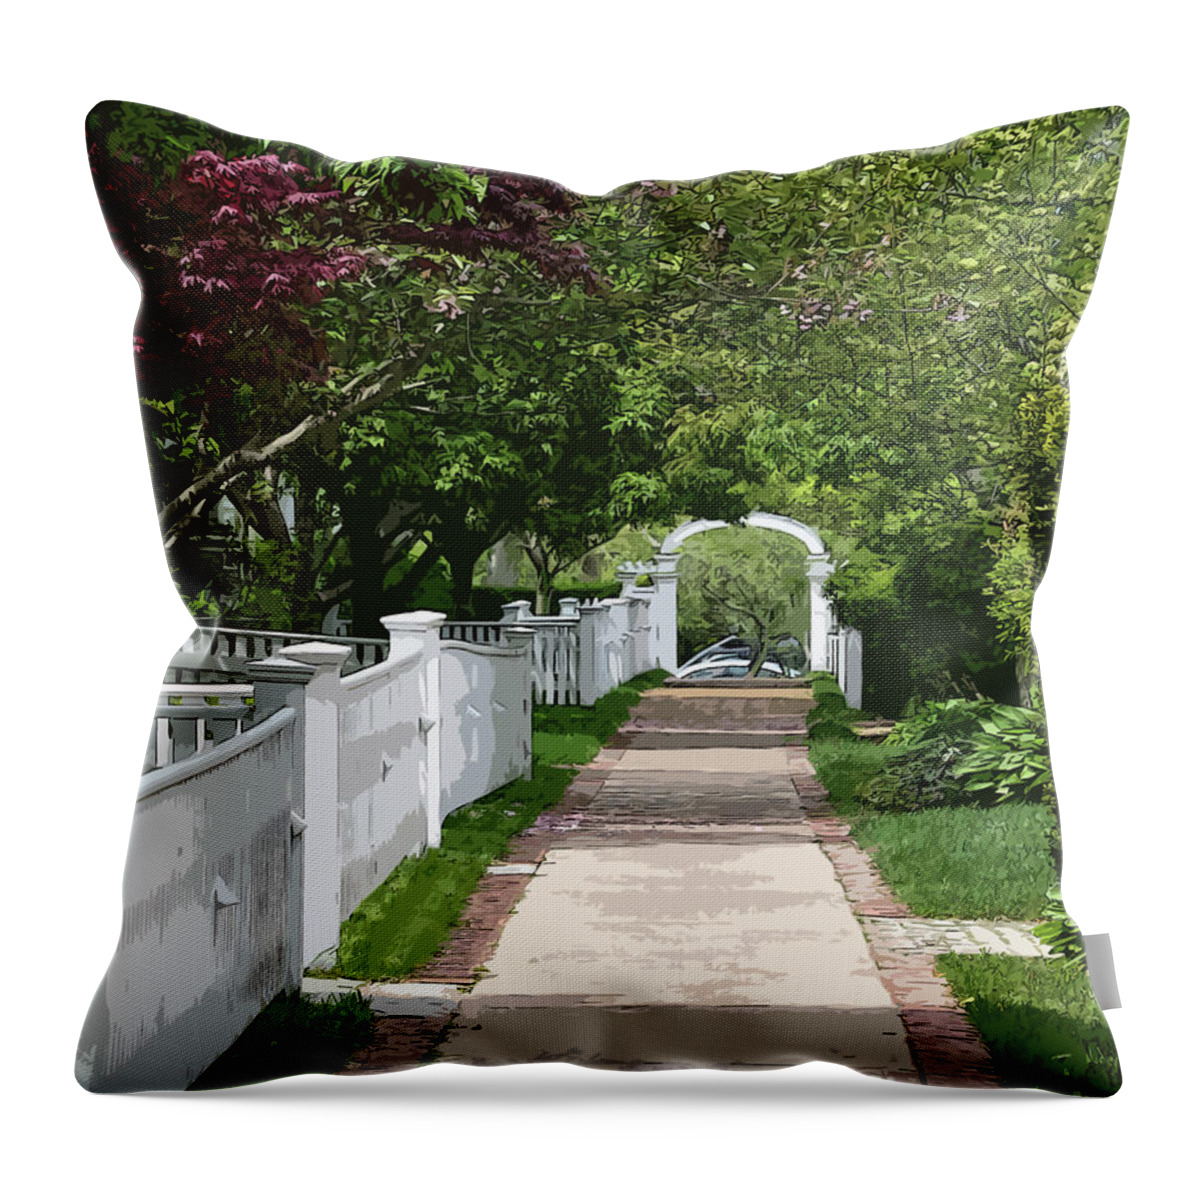 Picket-fence Throw Pillow featuring the digital art The Arbor by Kirt Tisdale